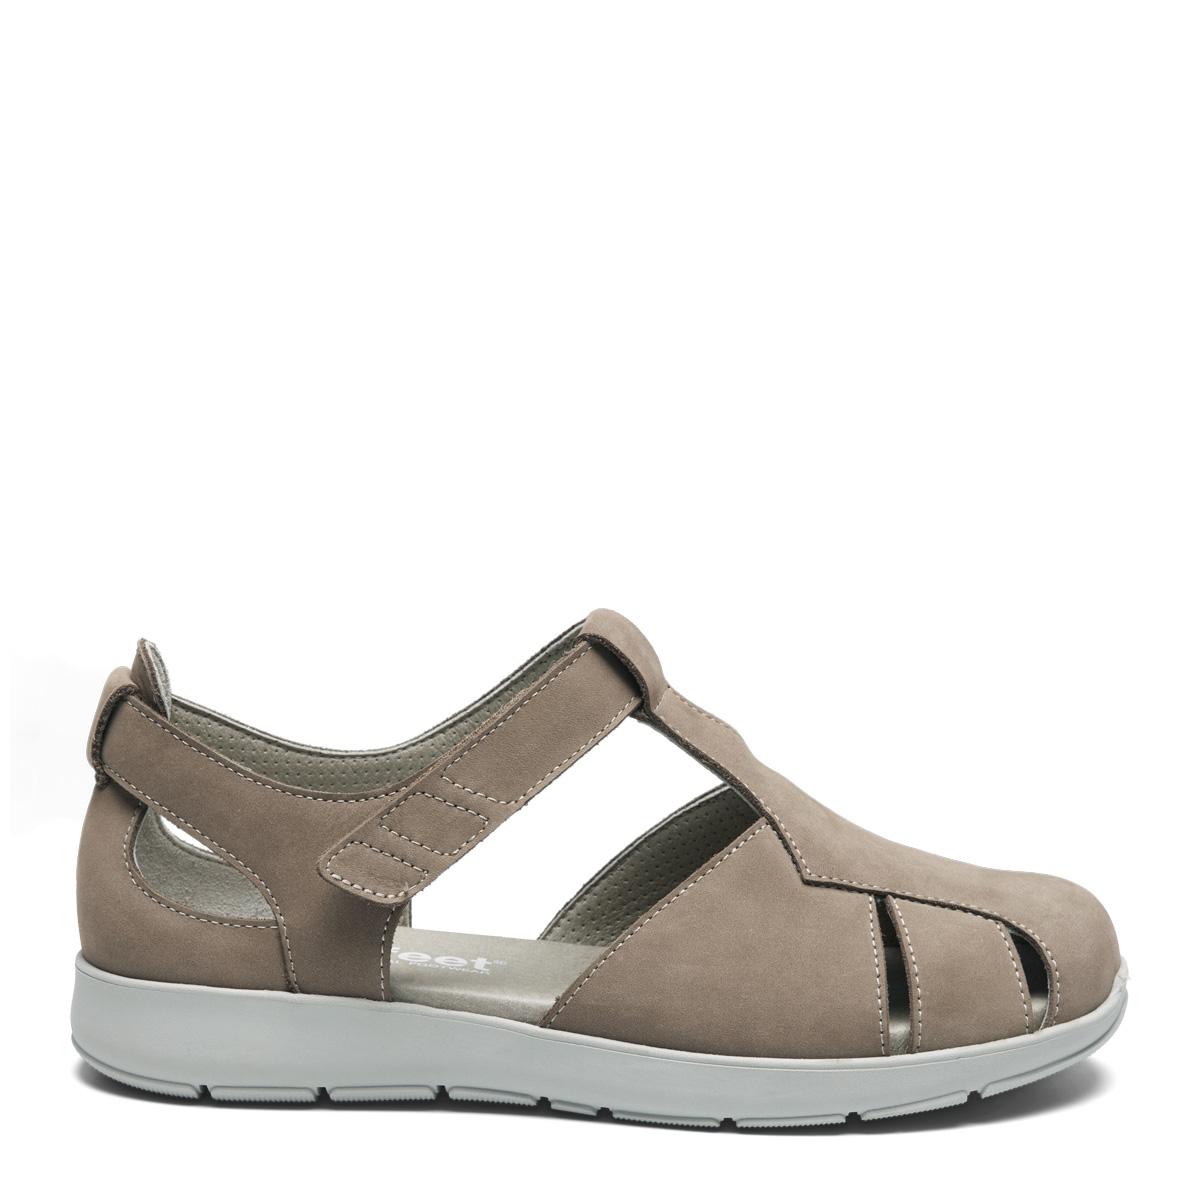 Closed sandal with adjustable velcro strap for women